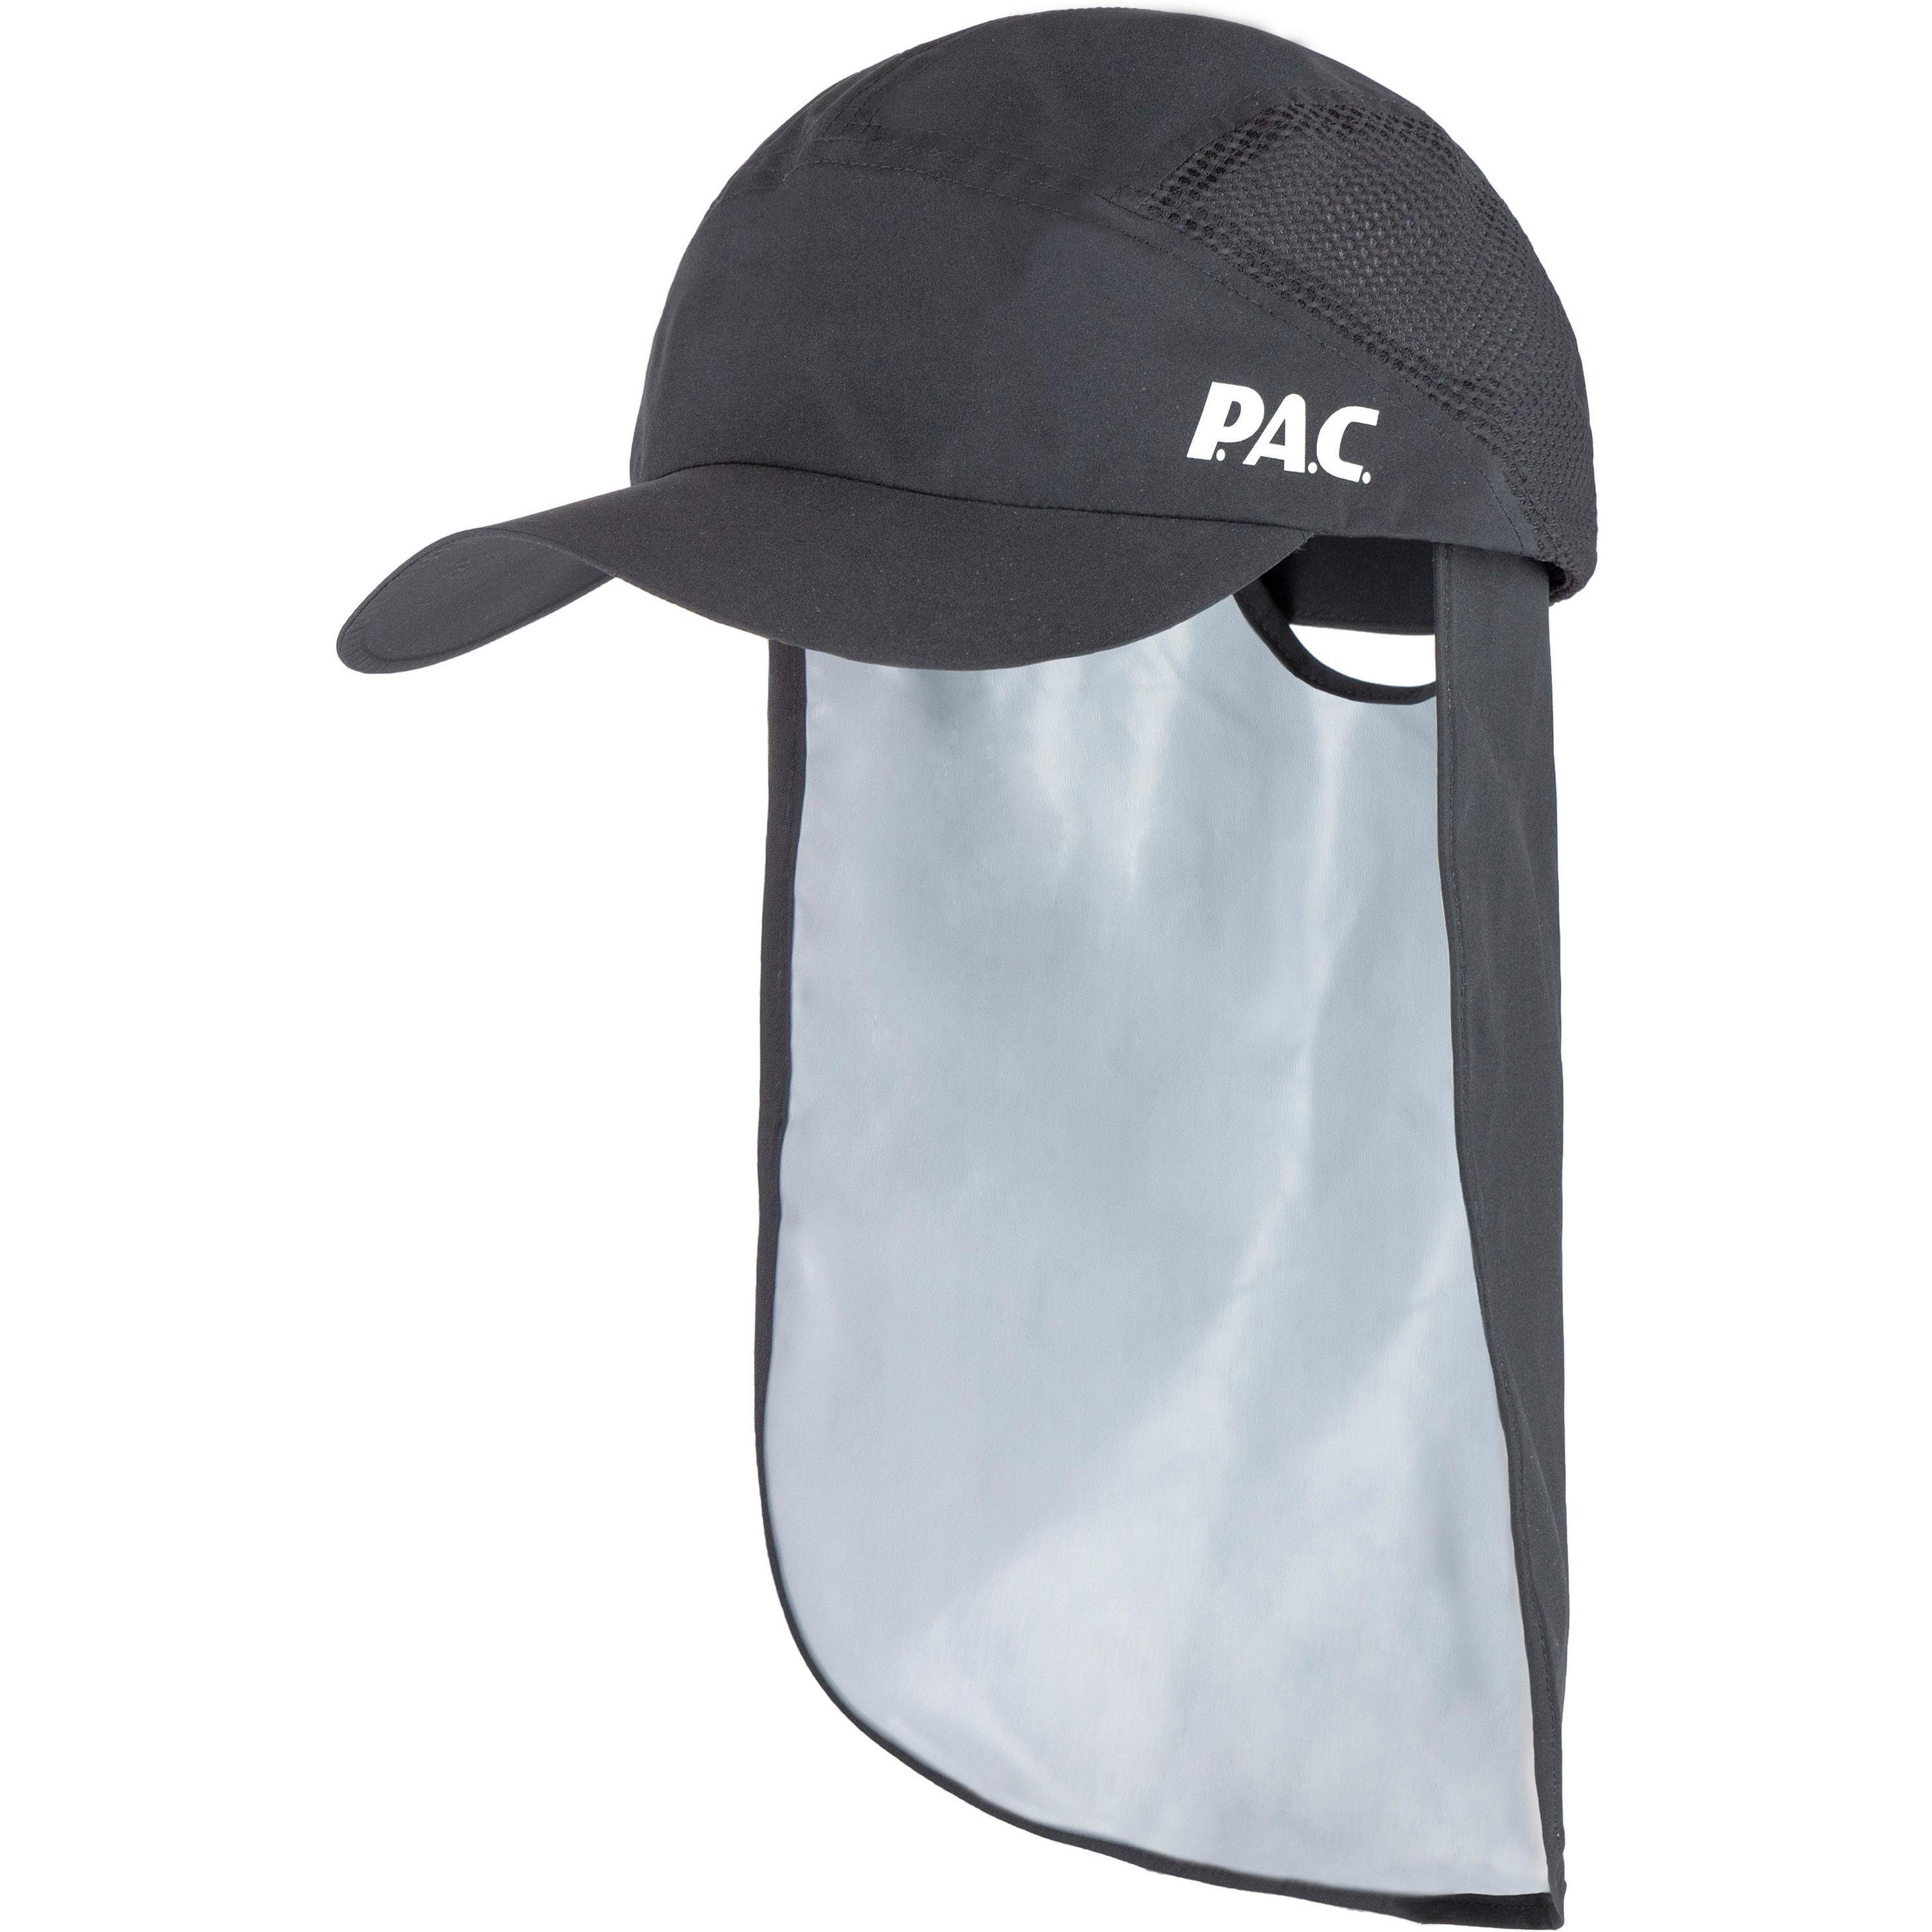 PAC Fitted Cap Gilan black